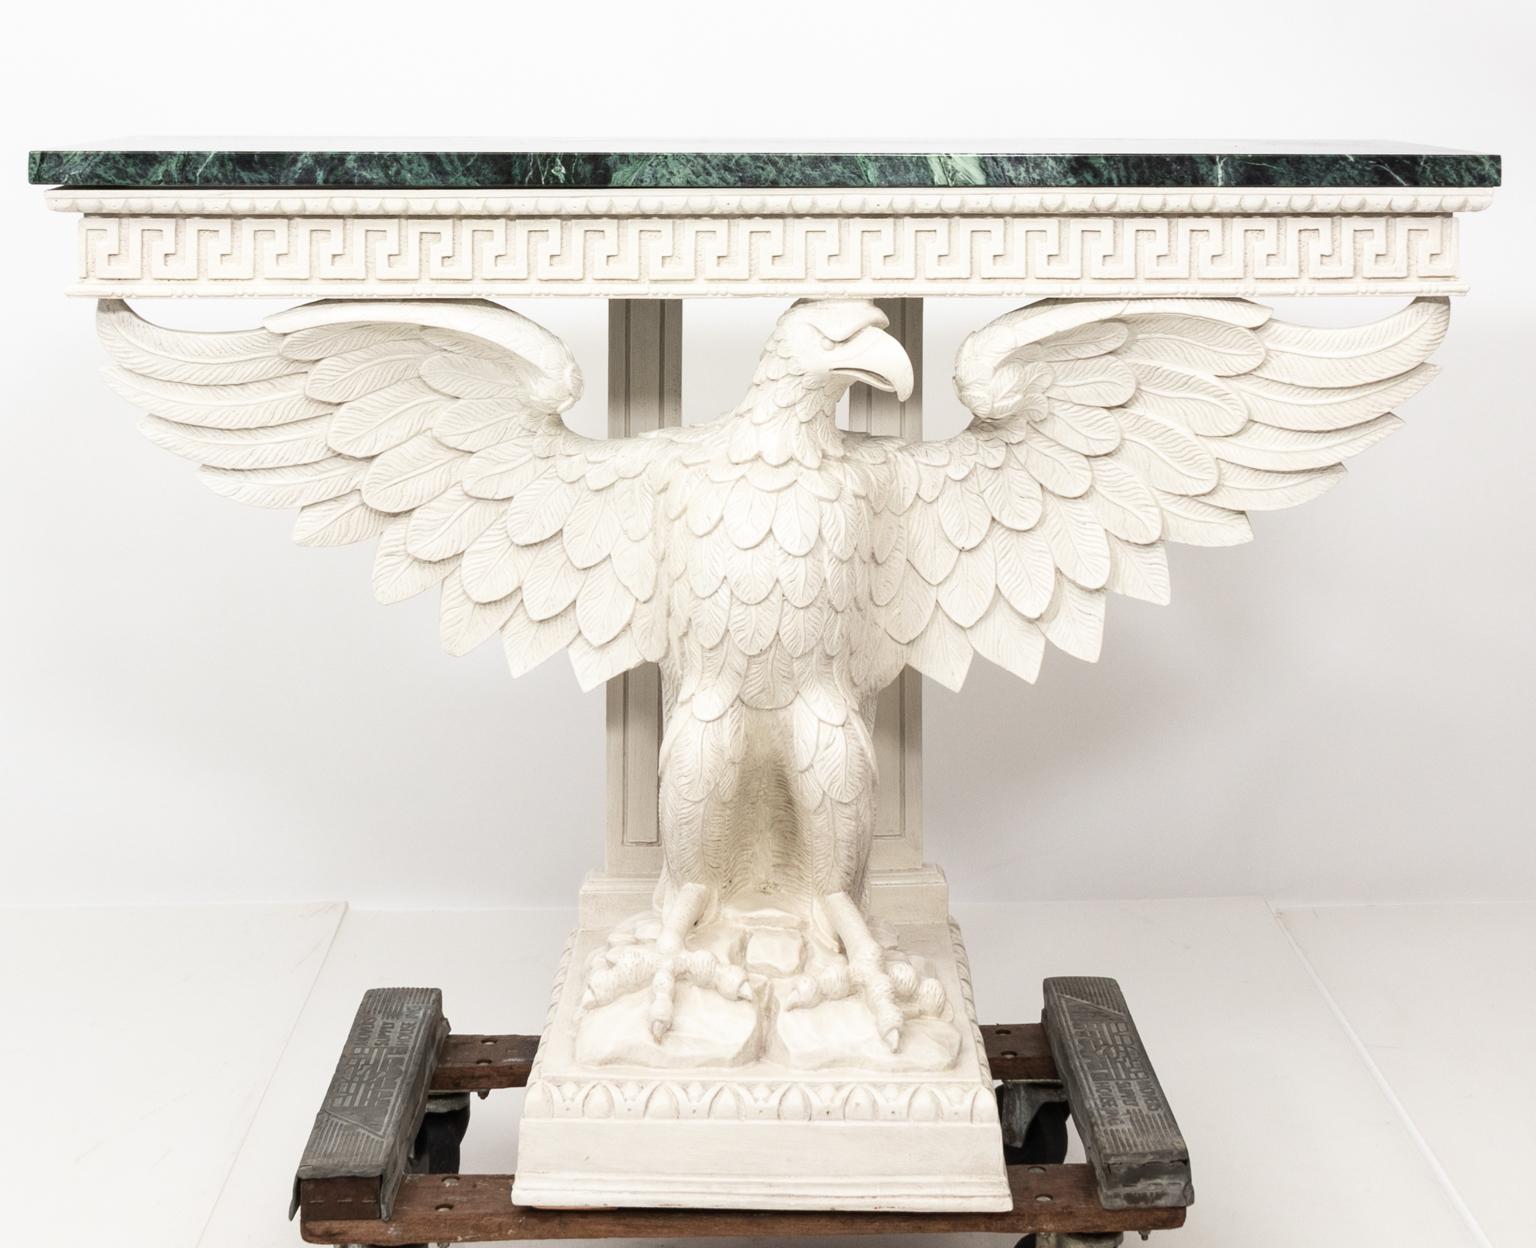 Pair of white painted Federal Revival style marble-top consoles with carved eagle bases and Greek key trim on the skirt, circa 20th century.
 